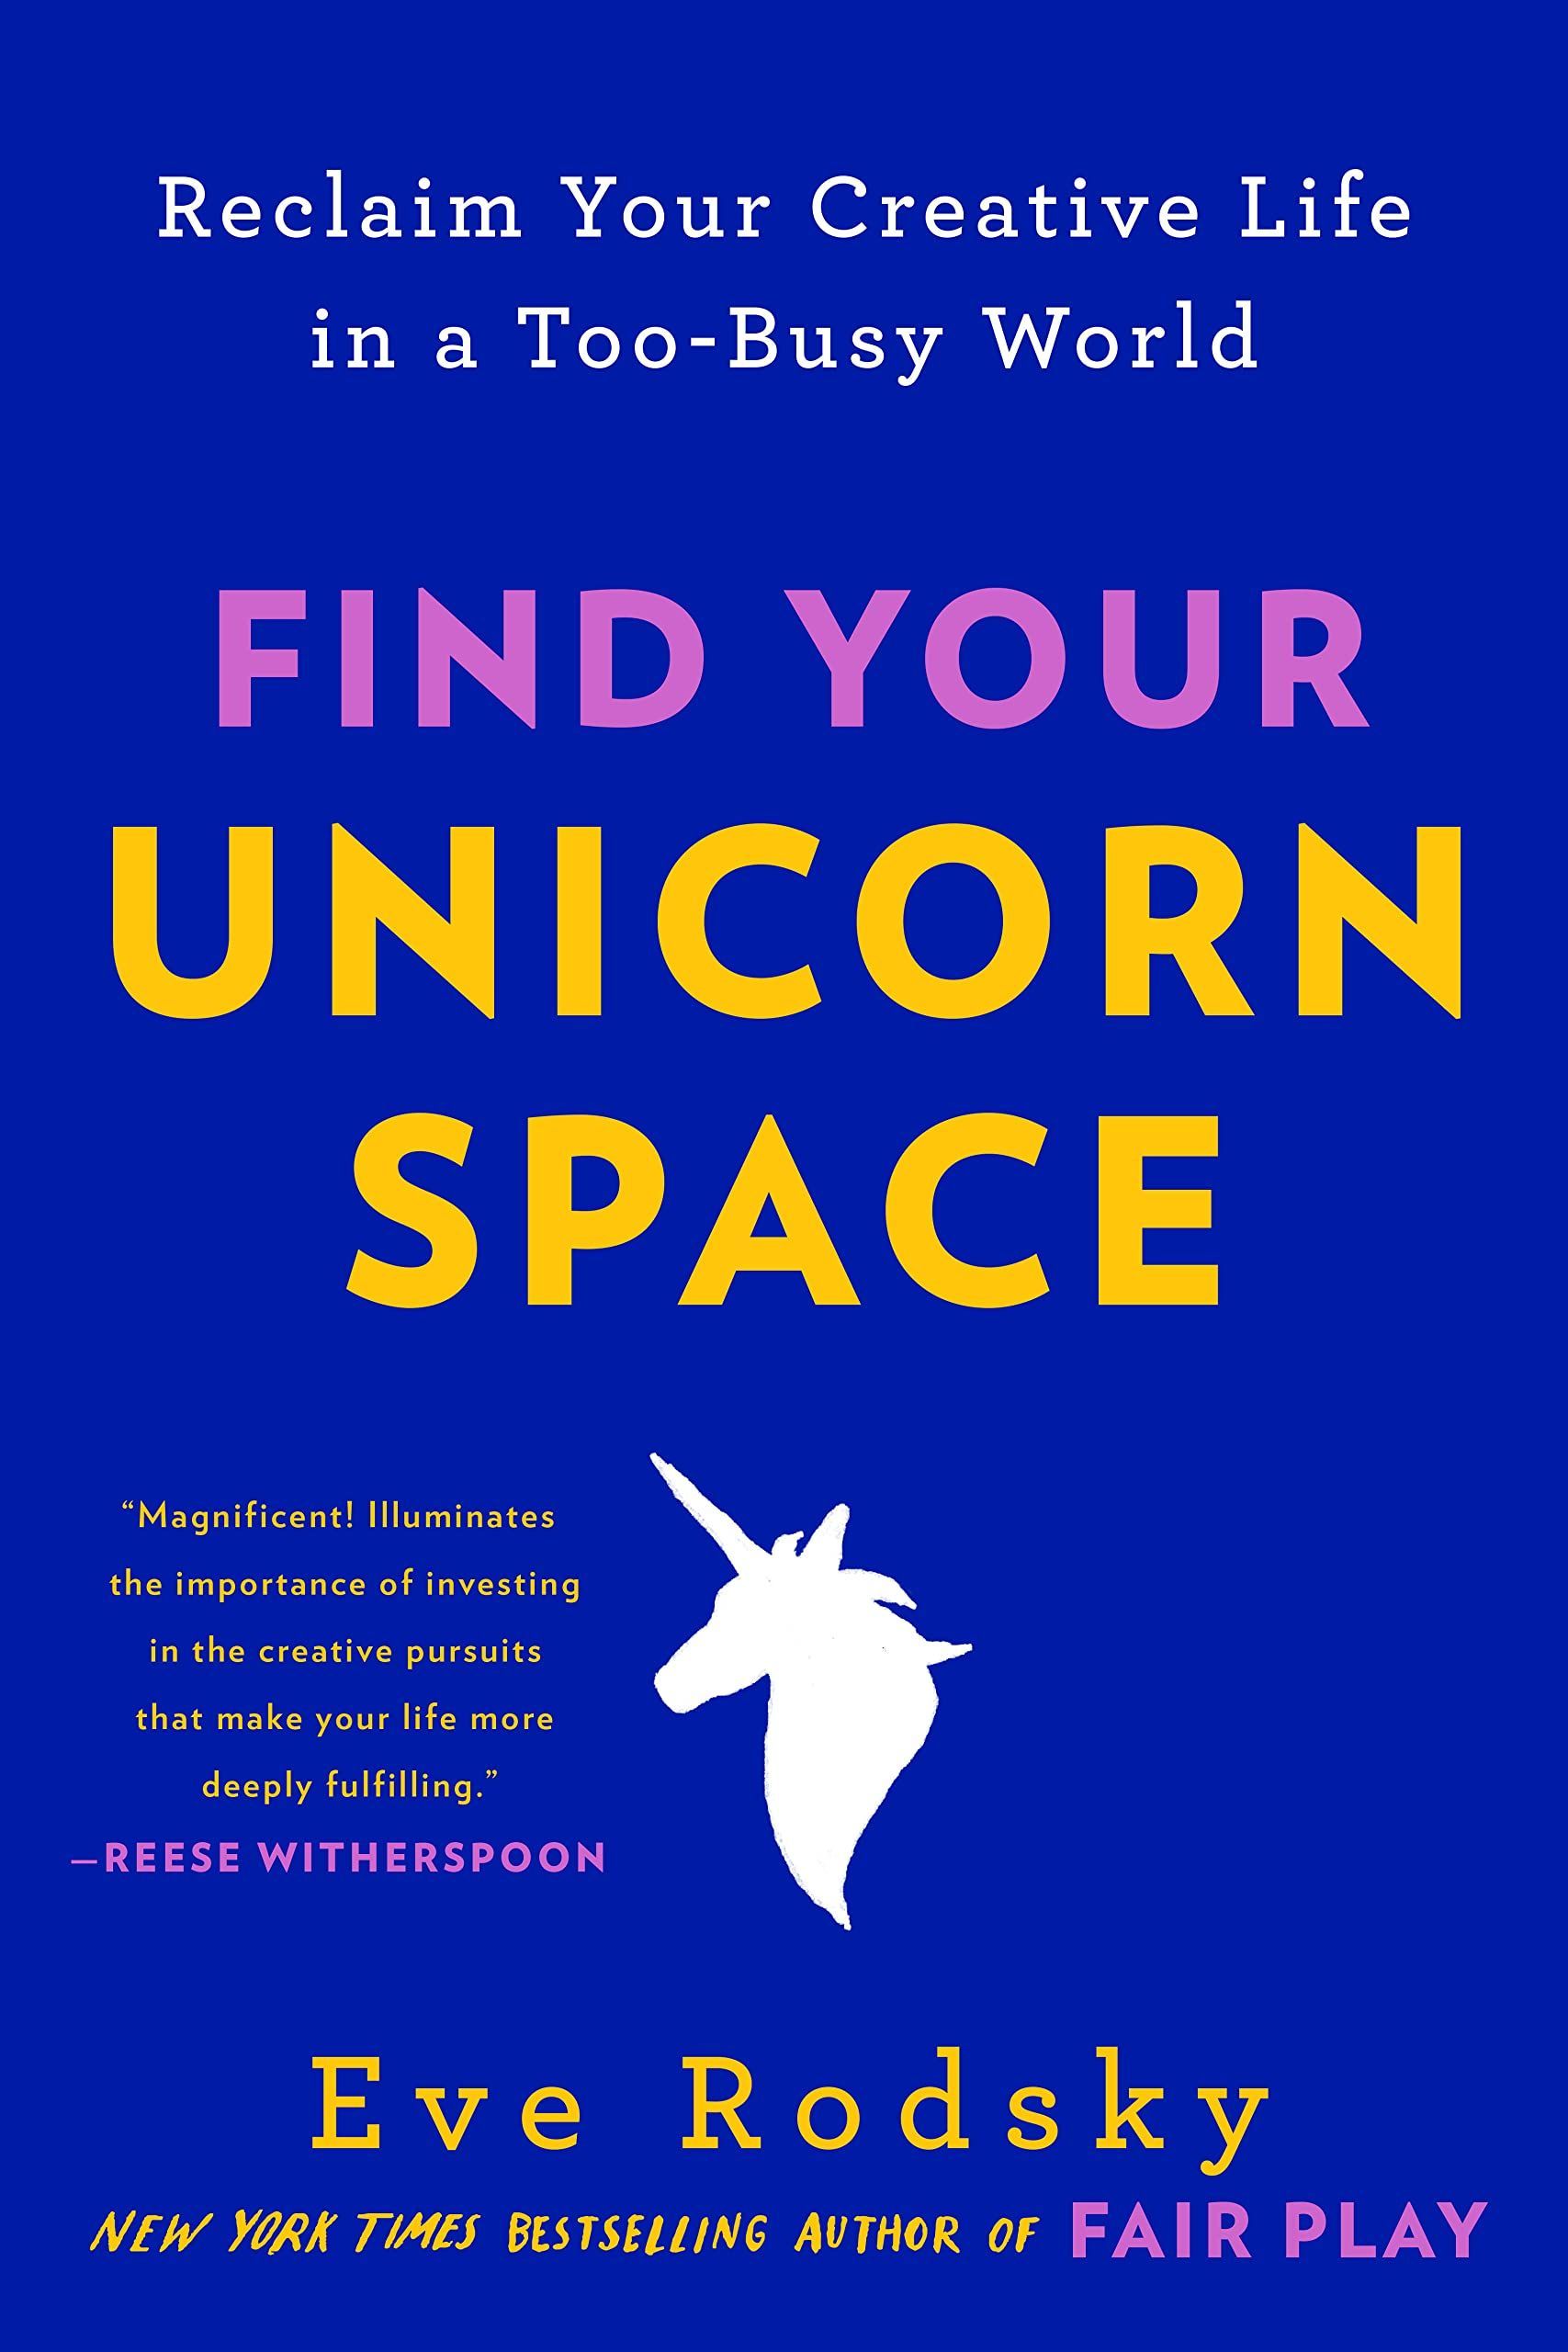 'Find Your Unicorn Space' by Eve Rodsky